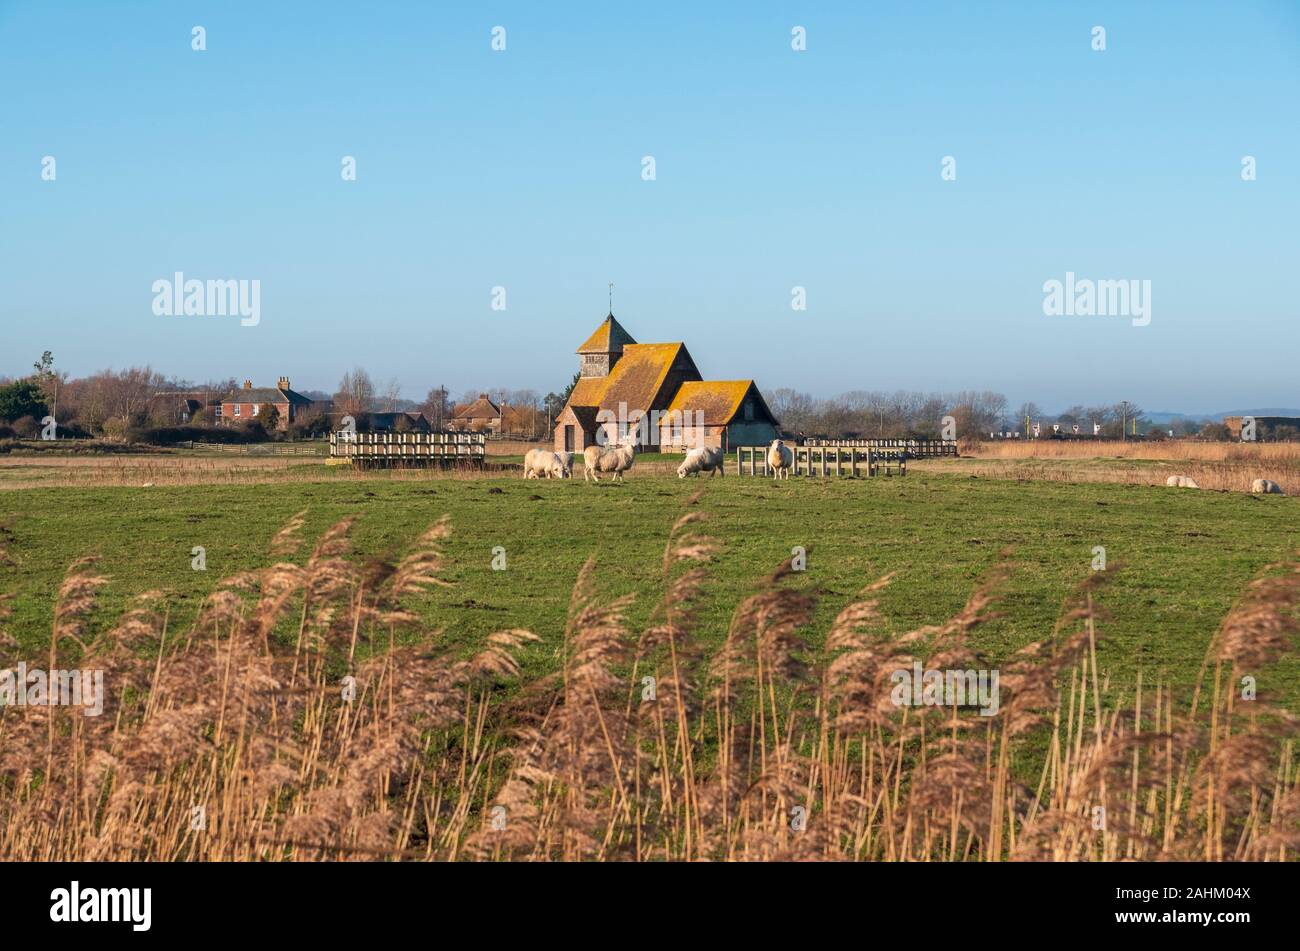 St Tomas a Becket Church, Fairfield, isolated on Romney Marsh surrounded by grazing sheep, Kent, UK Stock Photo